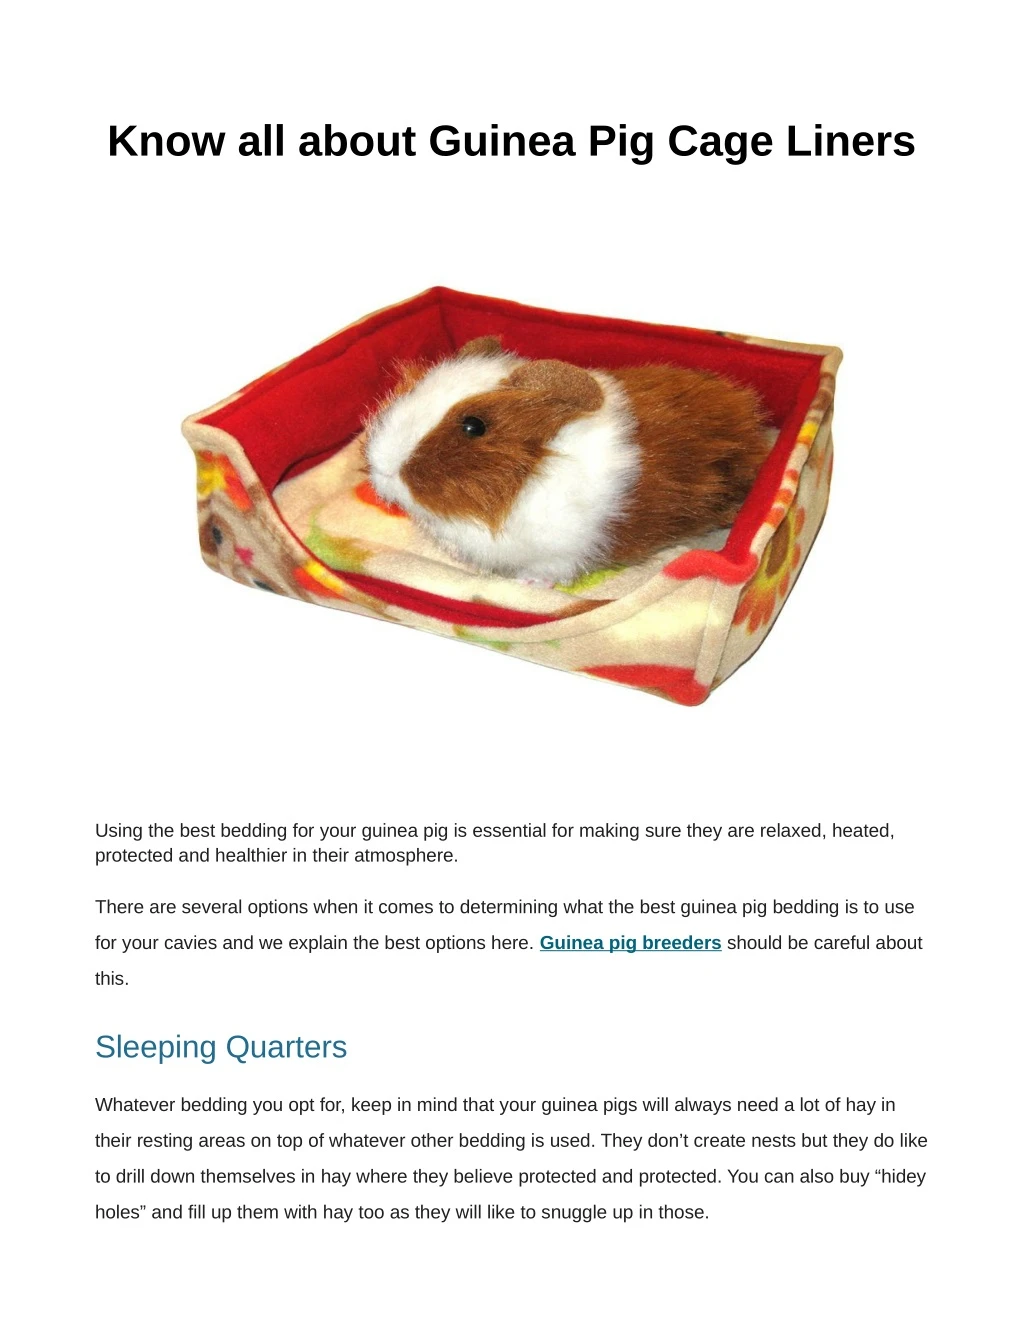 know all about guinea pig cage liners